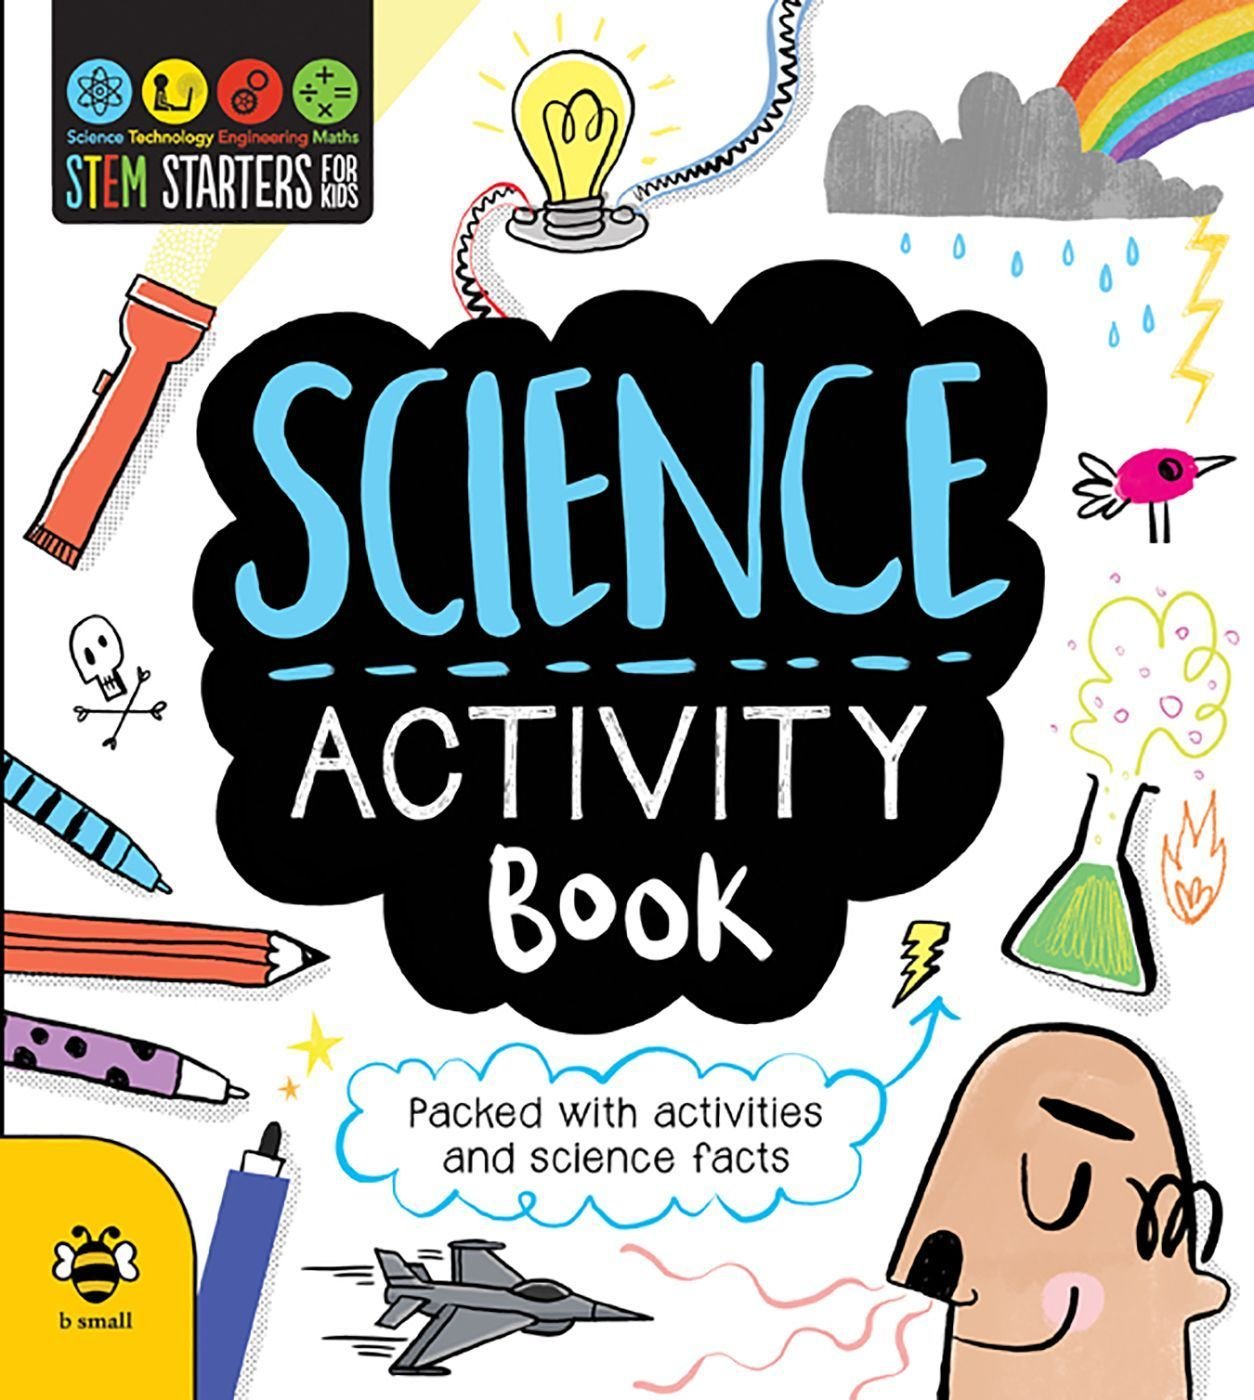 Free　Book　Activity　Sam　Buy　With　Hutchinson　Science　by　Delivery